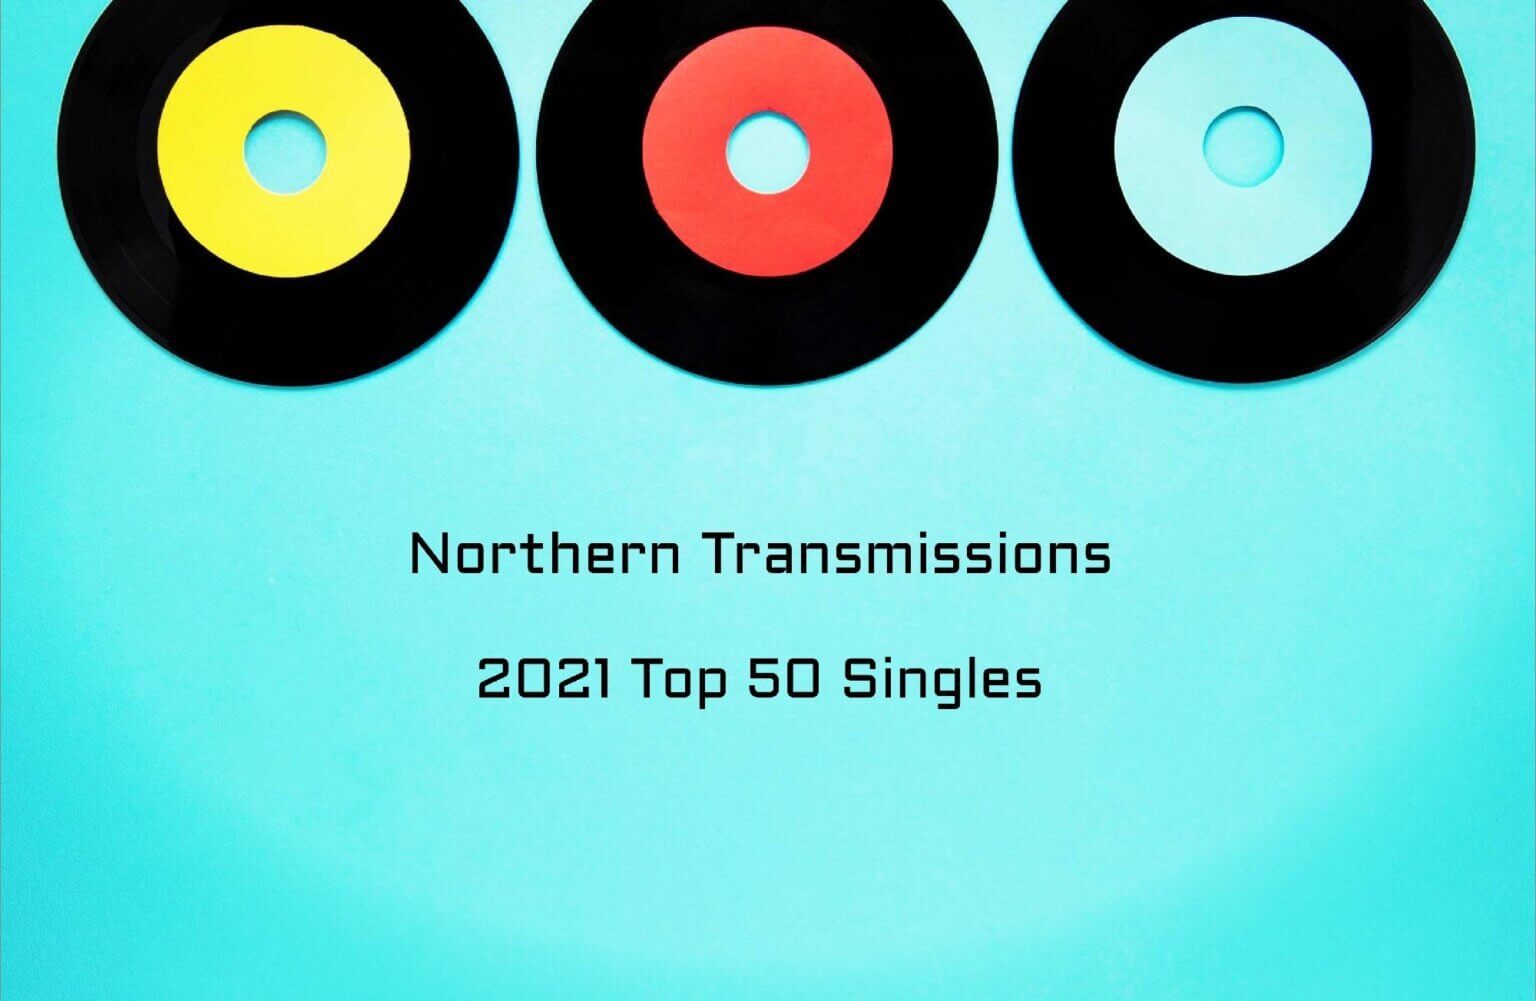 Northern Transmissions Top 50 Singles Of 2021